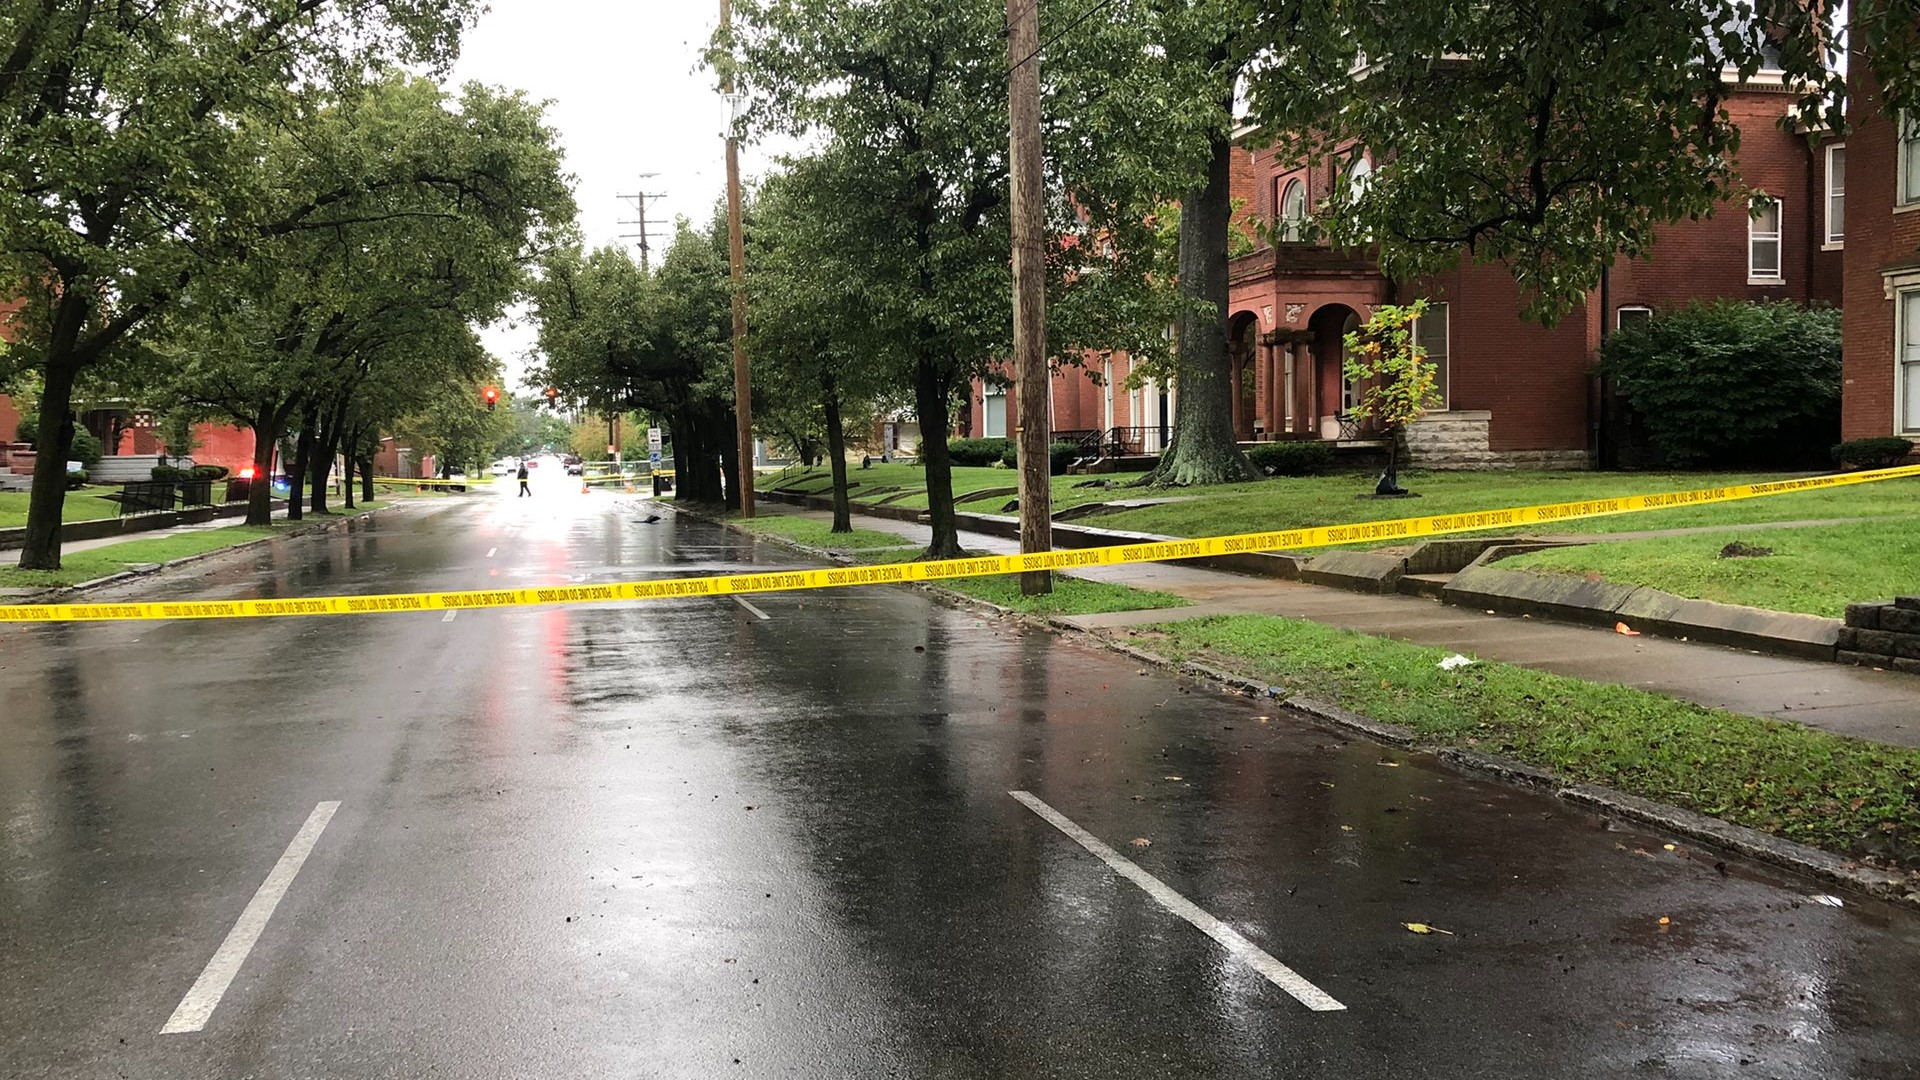 At least one student was killed after someone in a vehicle shot into a group waiting at a bus stop in the Russell neighborhood early Wednesday morning.